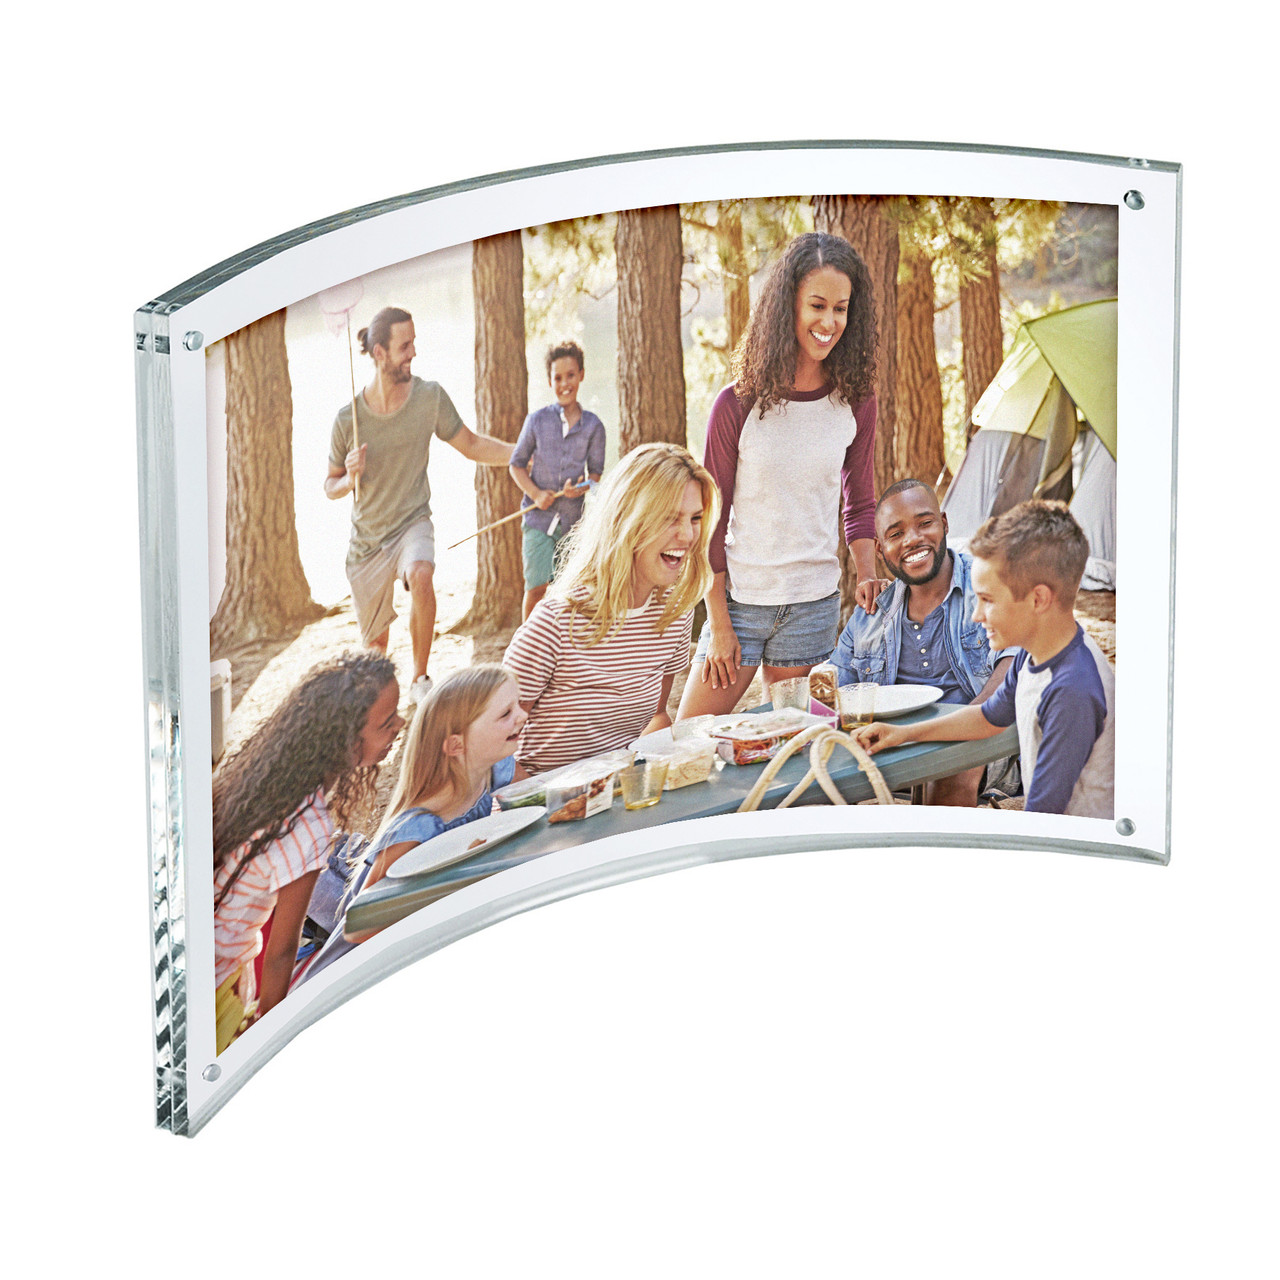 Azar Displays Clear Acrylic Magnetic Photo Block Frame Set With